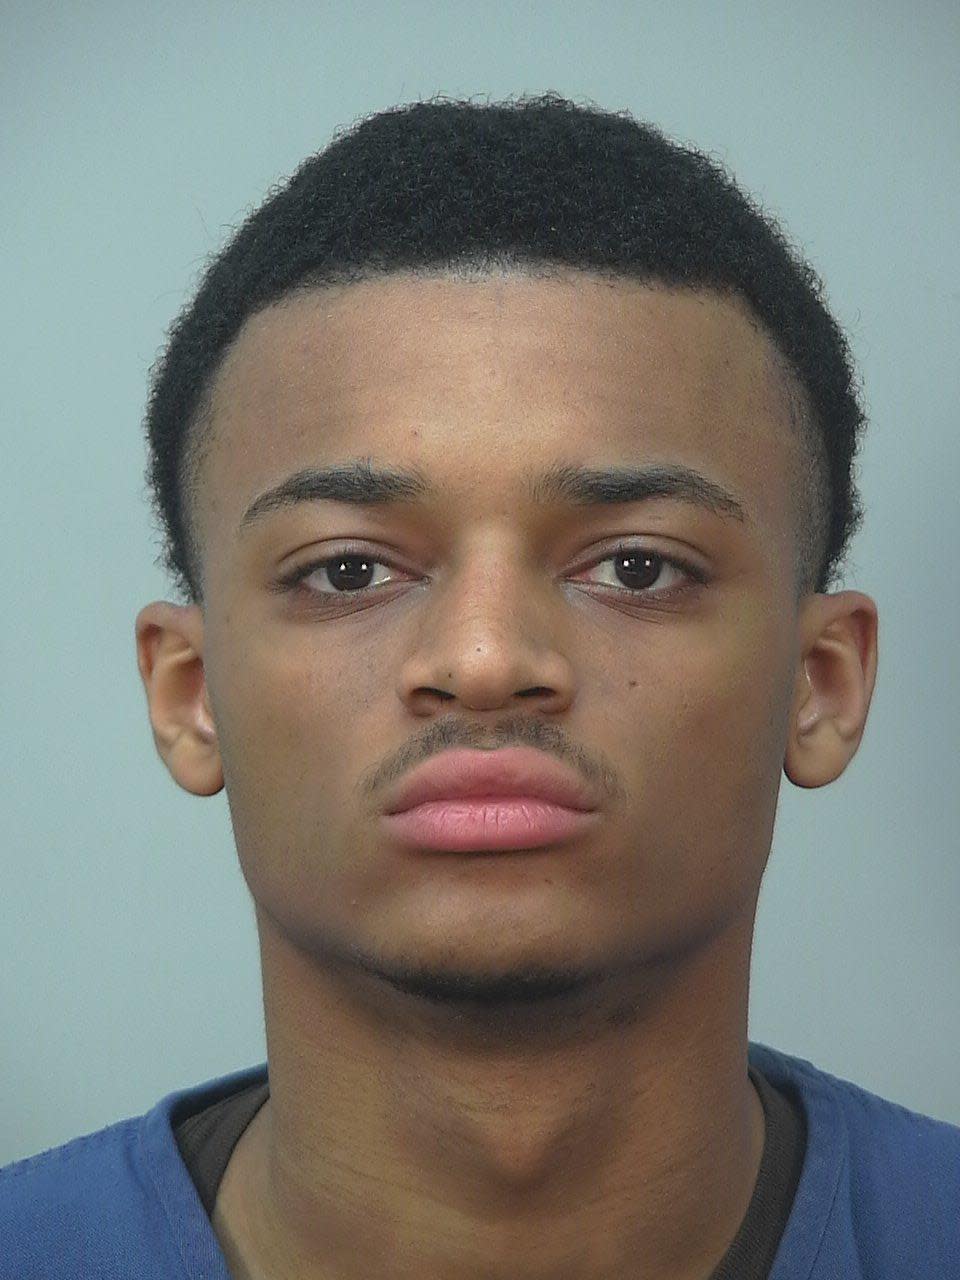 In this photo provided by the Dane County, Wisconsin Sheriff's Office, Khari Sanford is pictured in a booking photo dated April 3, 2020. Sanford has been booked into the Dane County Jail on two counts of party to the crime of first-degree intentional homicide, in the slayings of a University of Wisconsin physician and her husband. (AP/Dane County Sheriff's Office)